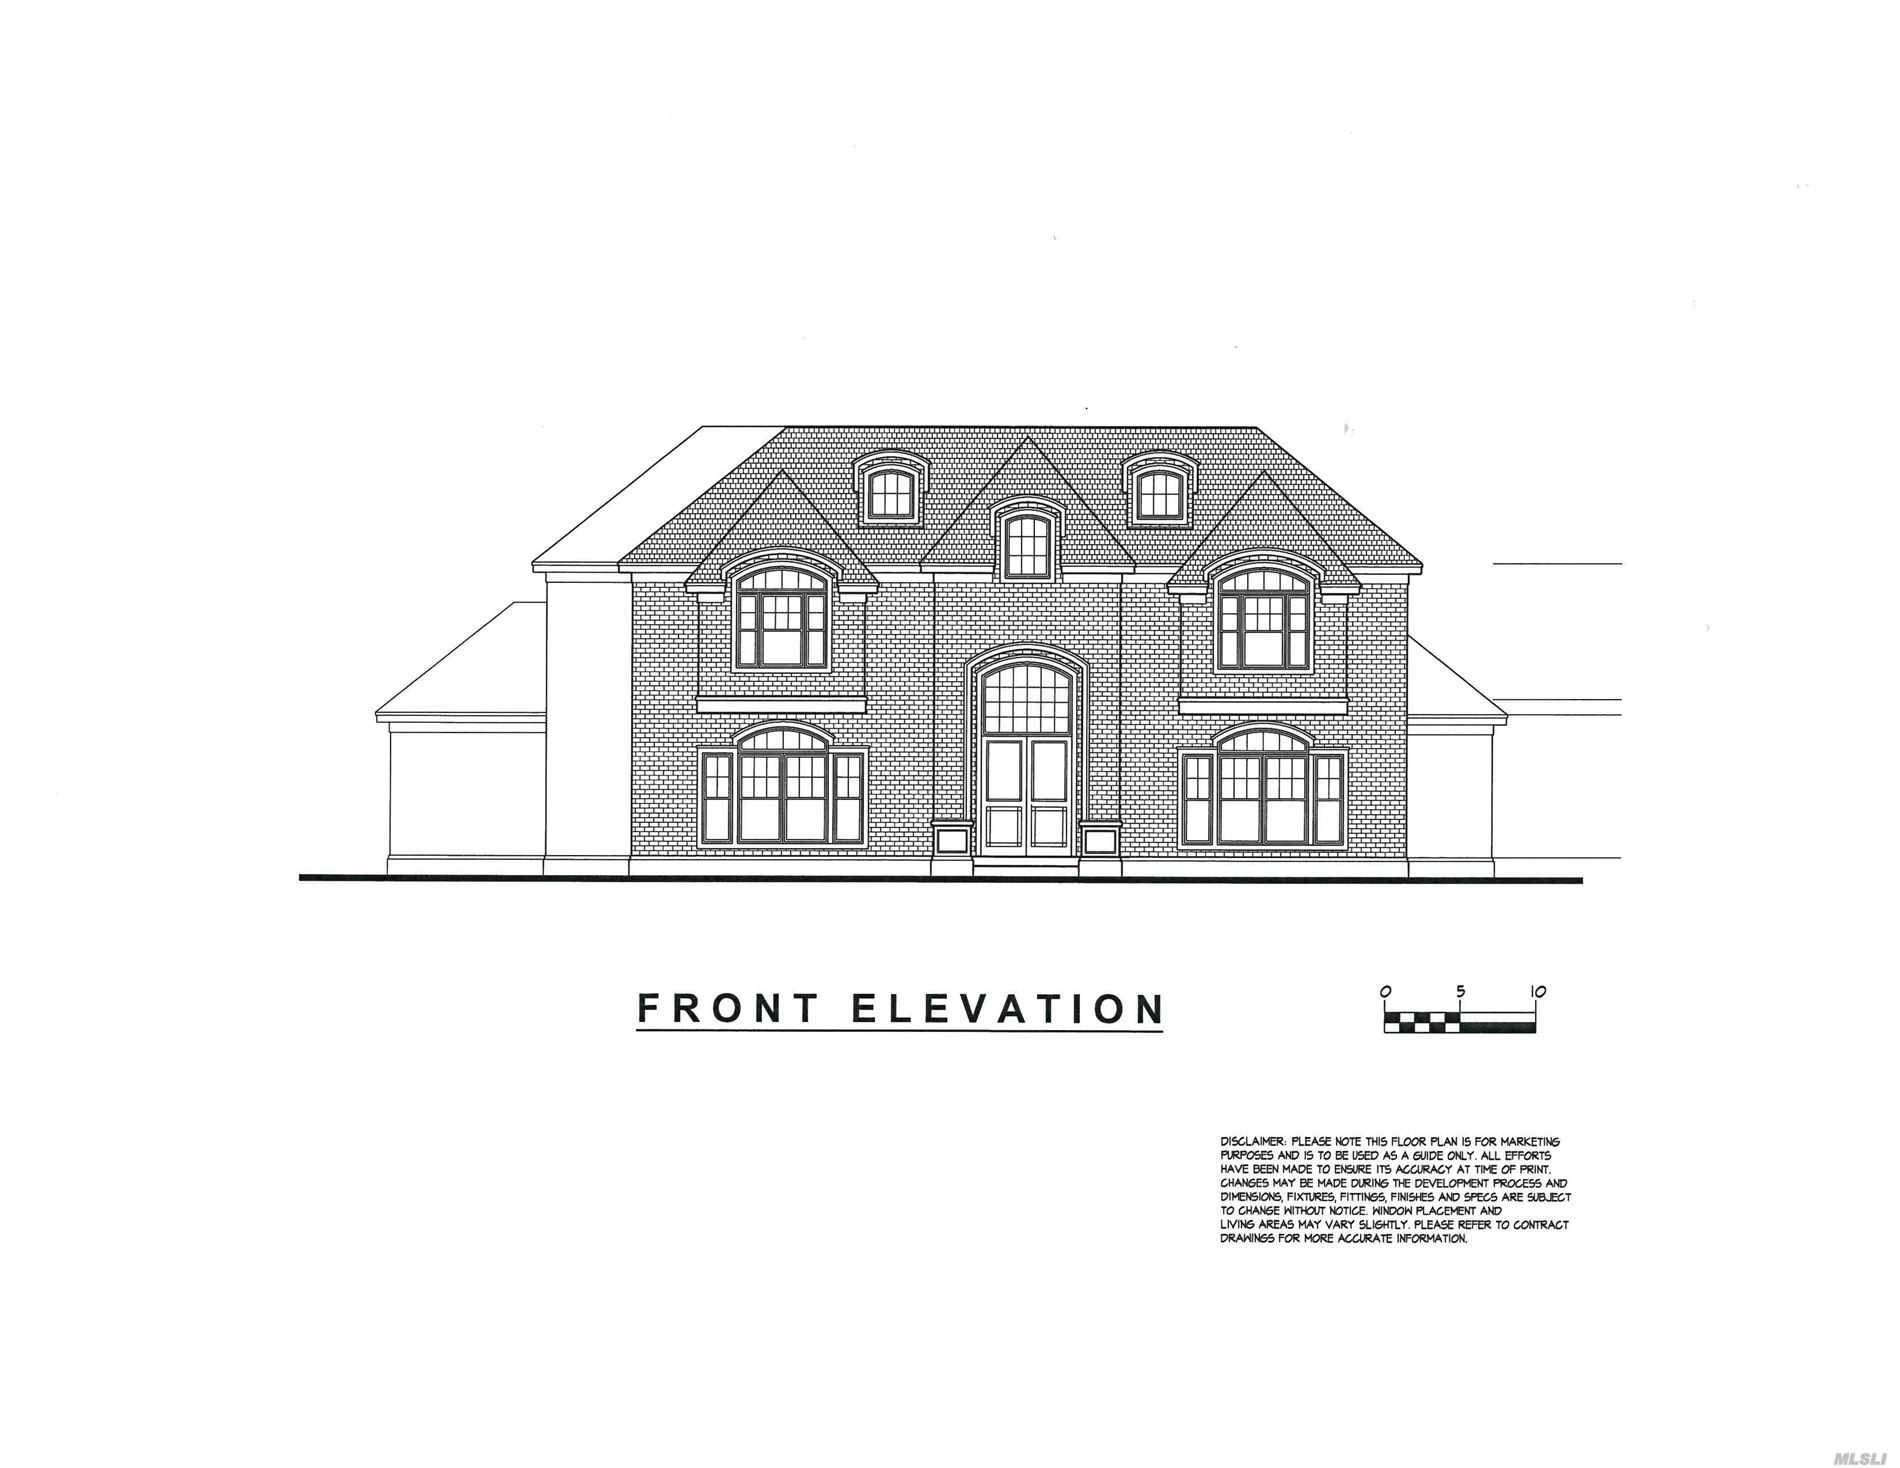 Opportunity to Custom Design Your Dream Home in this Spectacular 5 Bedroom, 6.